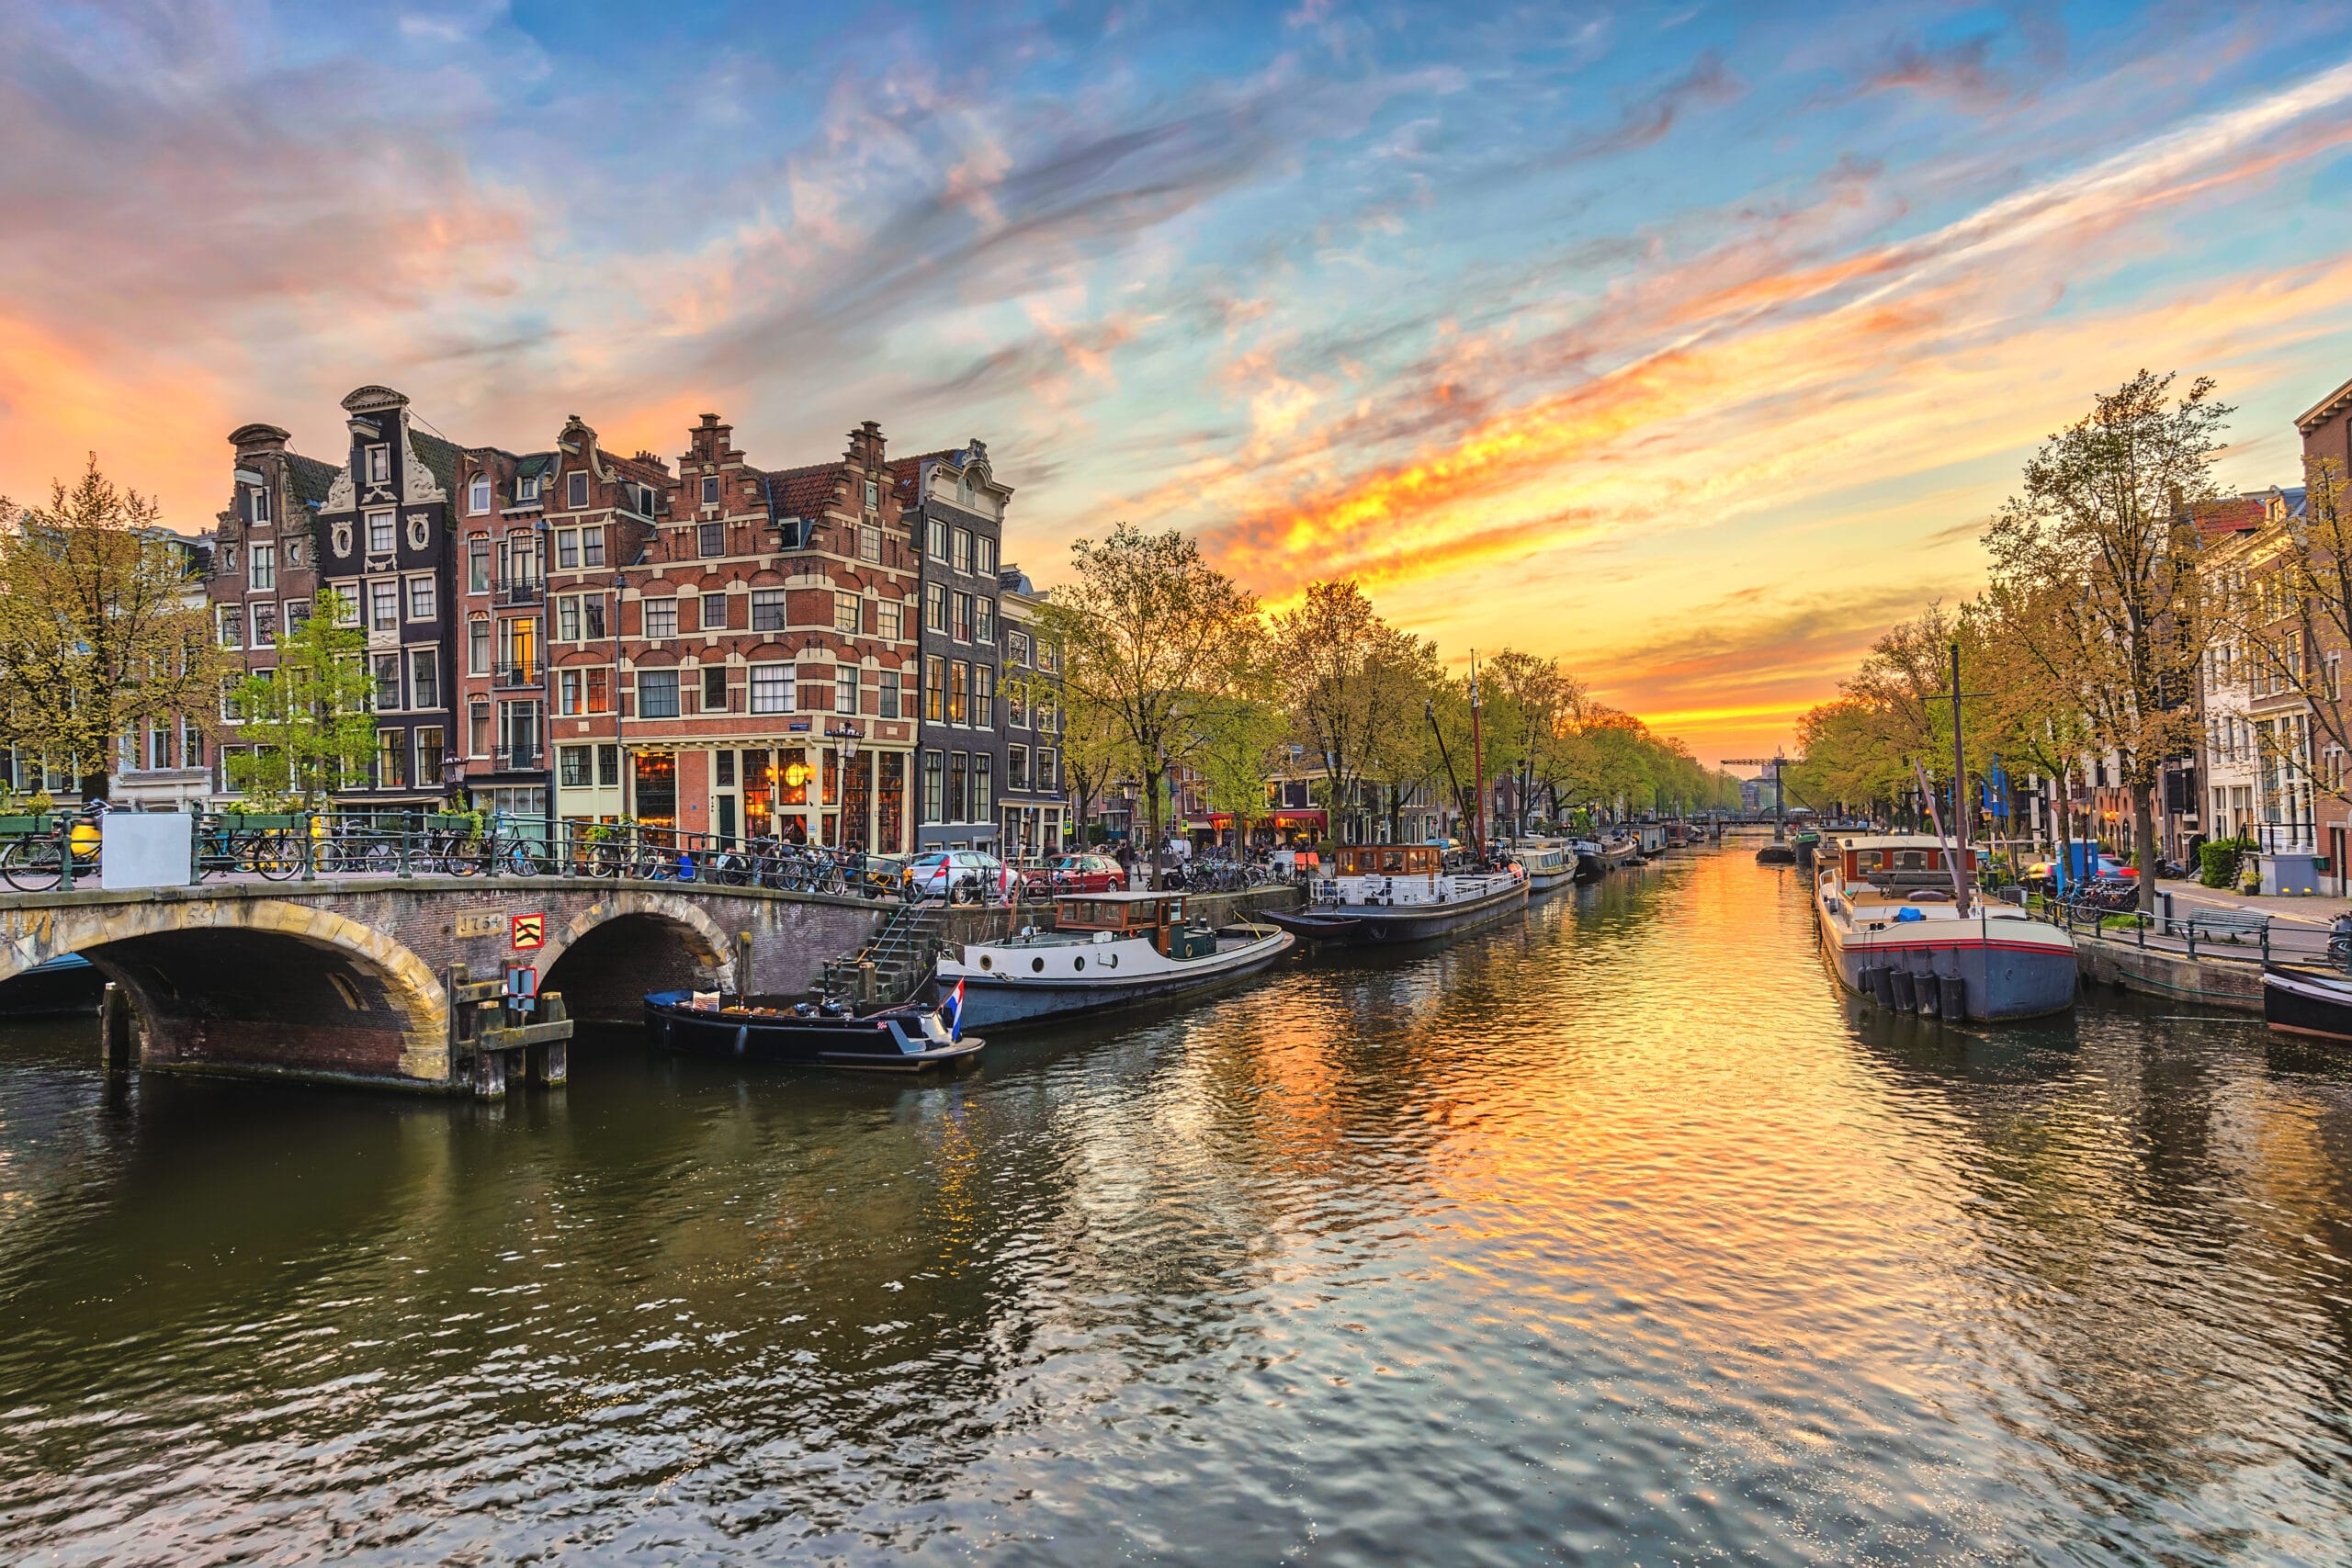 9 Cannabis facts about Amsterdam